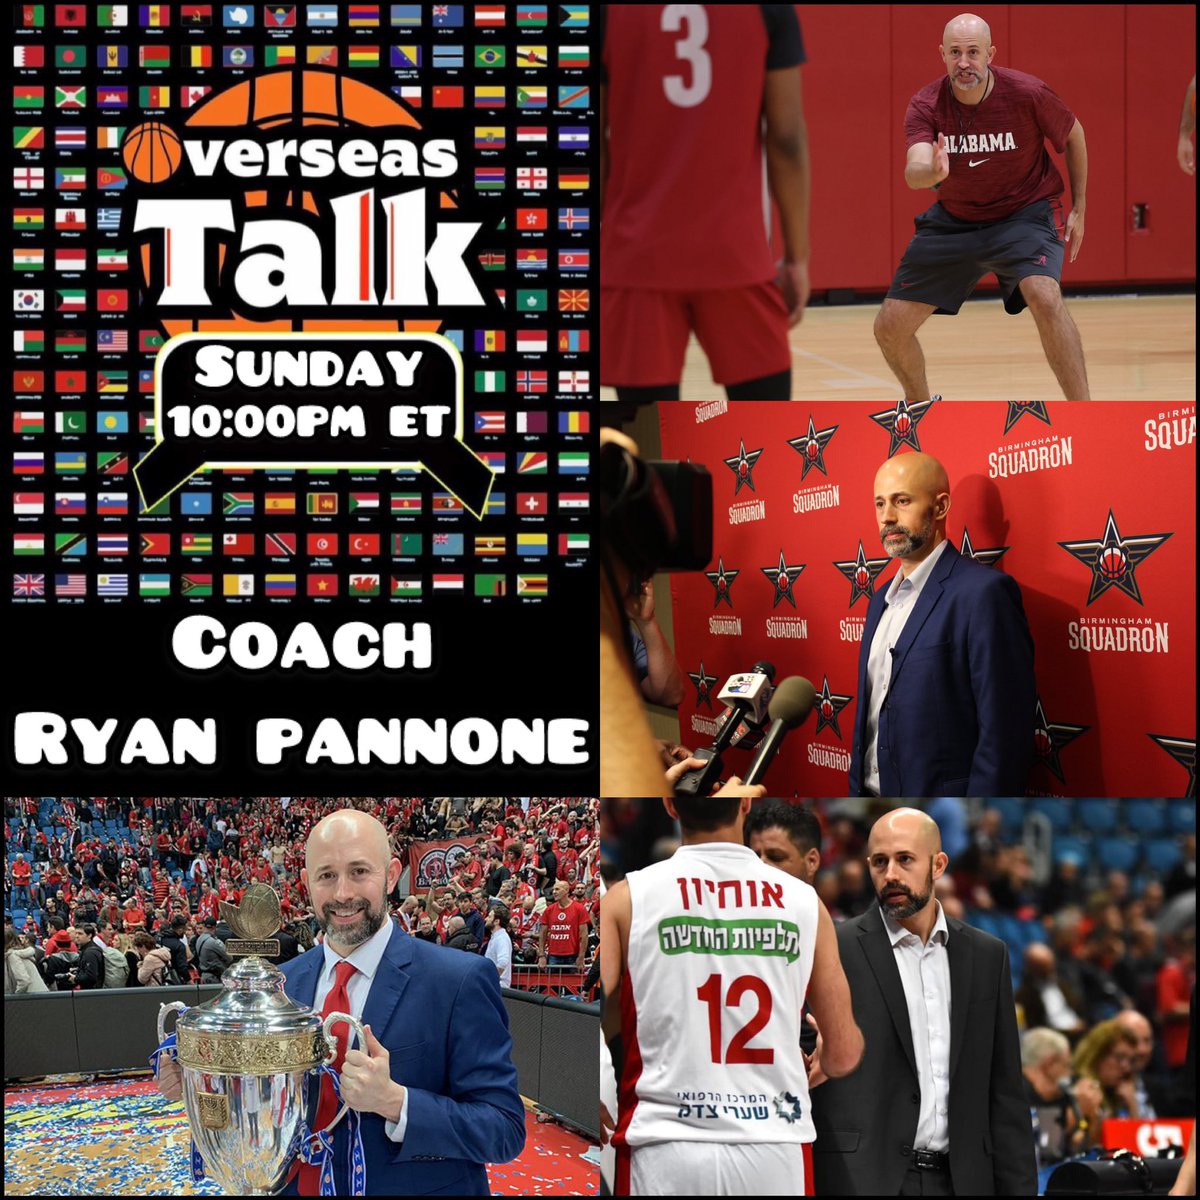 Tonight at 10:00PM ET we get to hear from @RyanPannone ! Tune into spaces and be sure to give him a follow if you don’t already